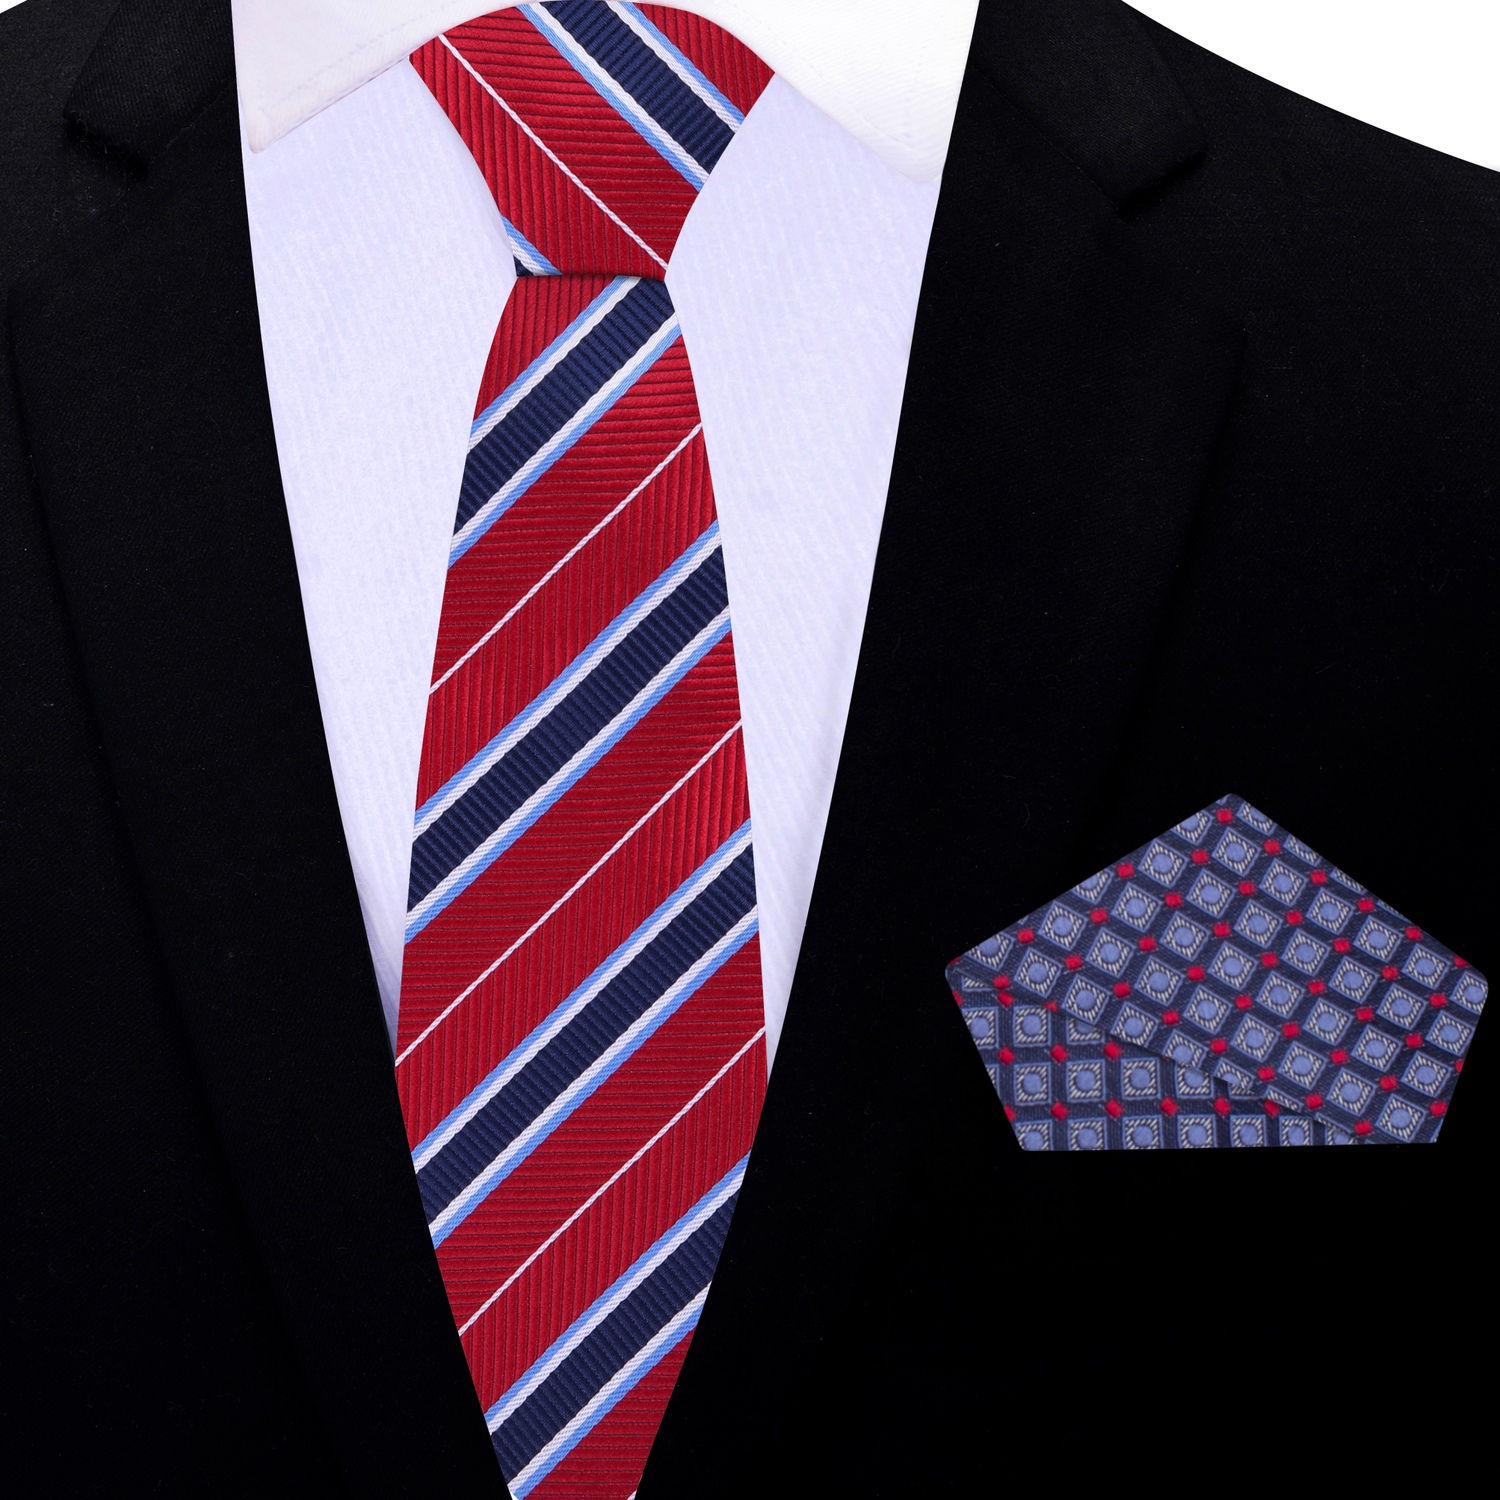 Thin Tie: Red, Blue Stripe Necktie with Blue, Red Geometric Pocket Square